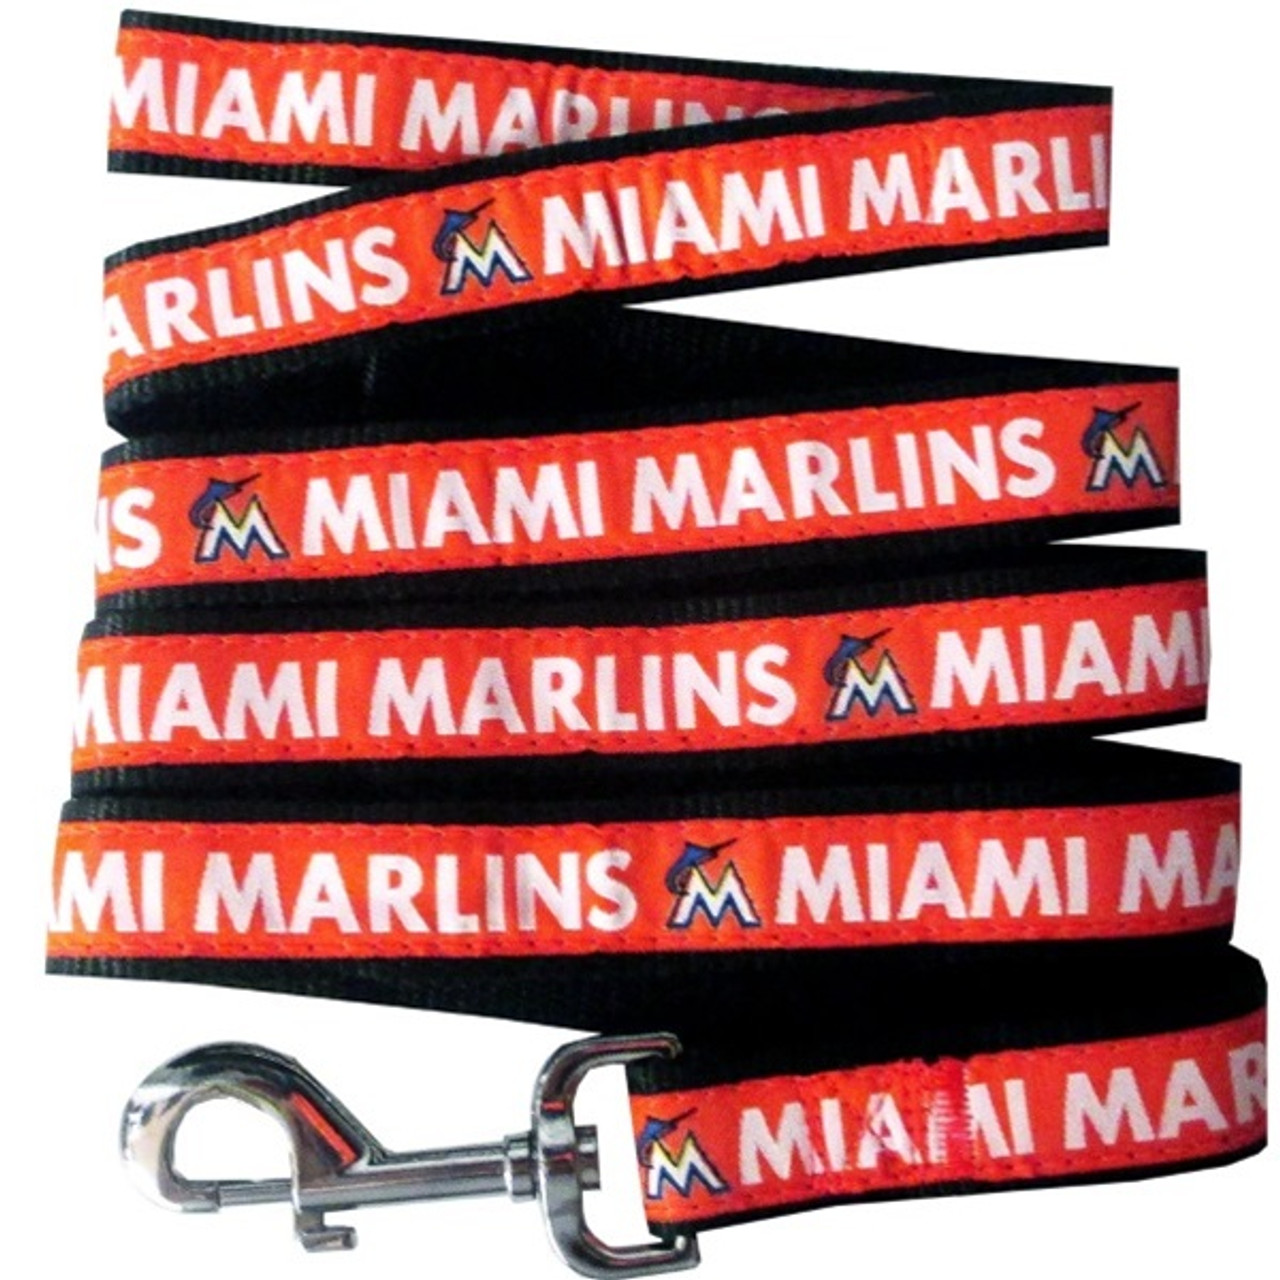 Official Miami Marlins Pet Gear, Marlins Collars, Leashes, Chew